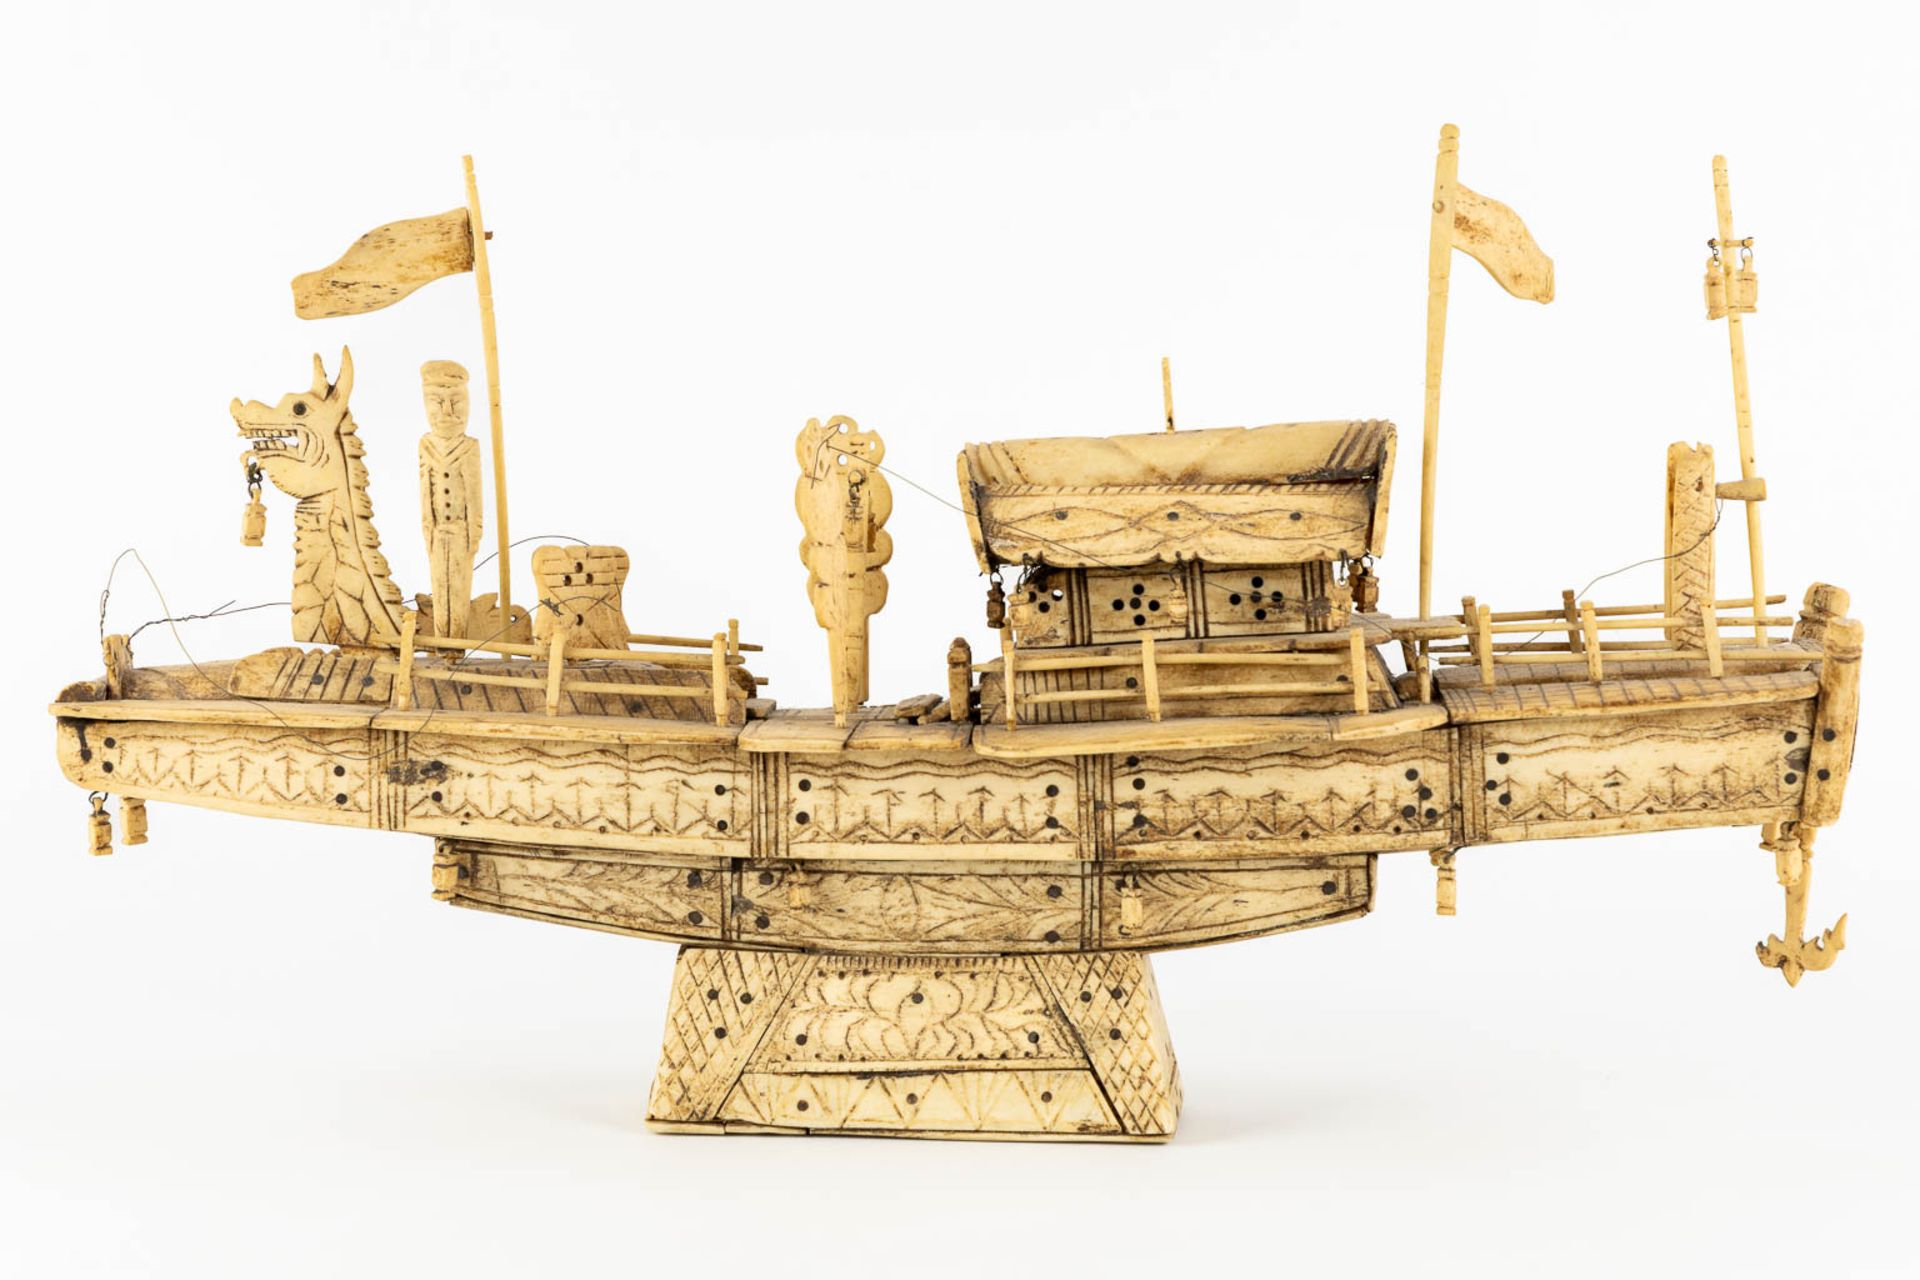 An antique Chinese model of a ship, sculptured bone. Circa 1900. (L:13 x W:50 x H:28 cm) - Image 3 of 11